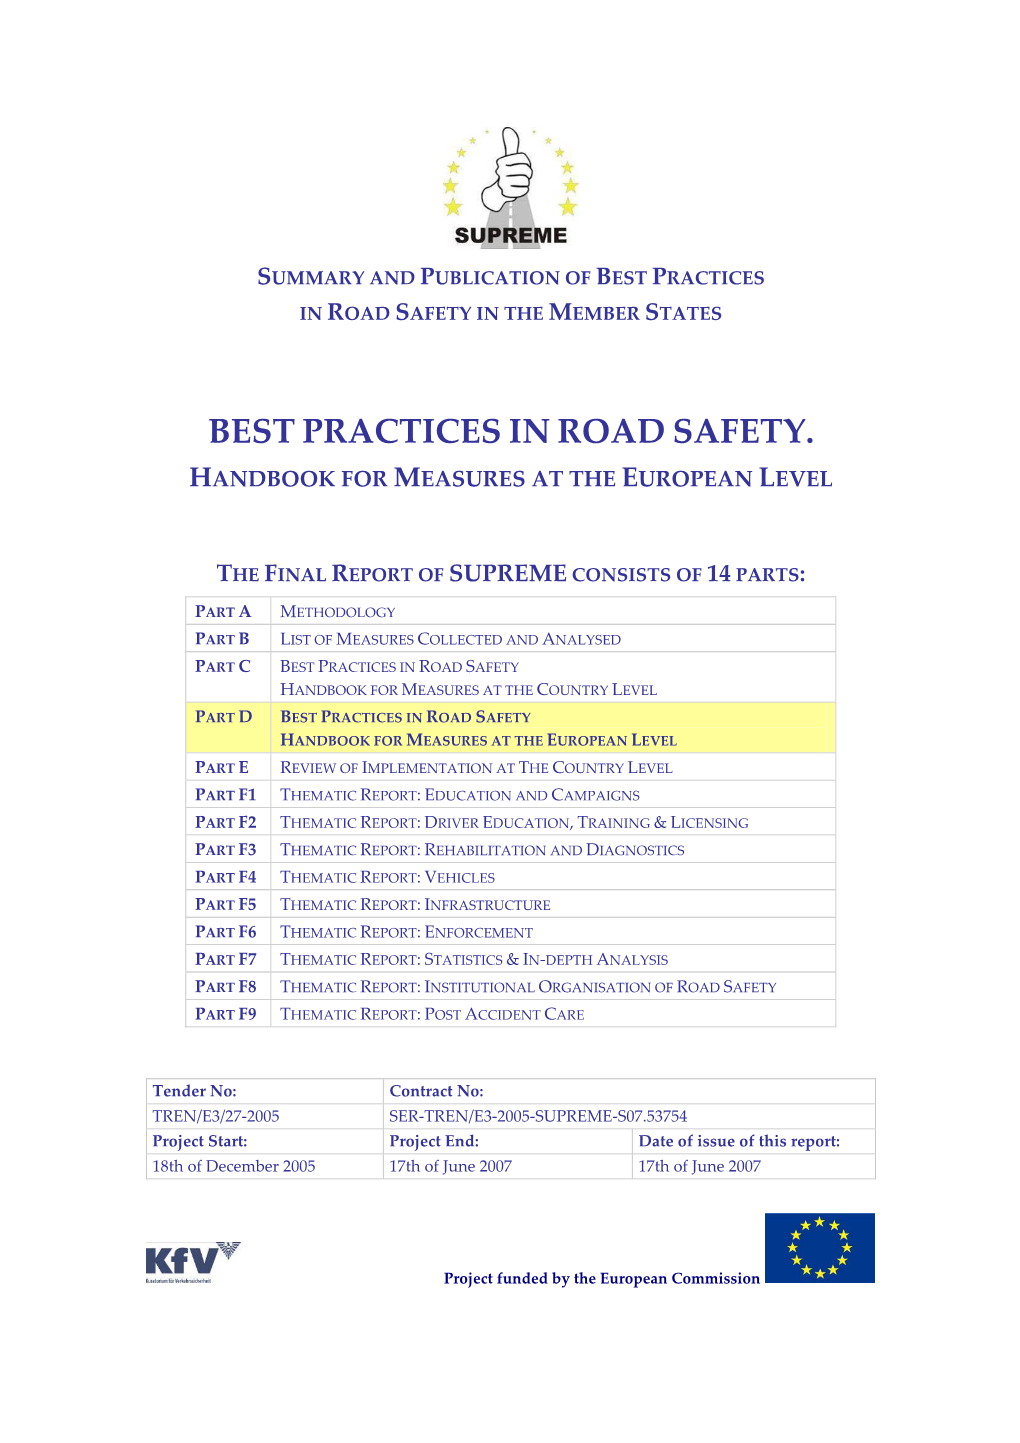 Best Practices in Road Safety. Handbook for Measures at the European Level